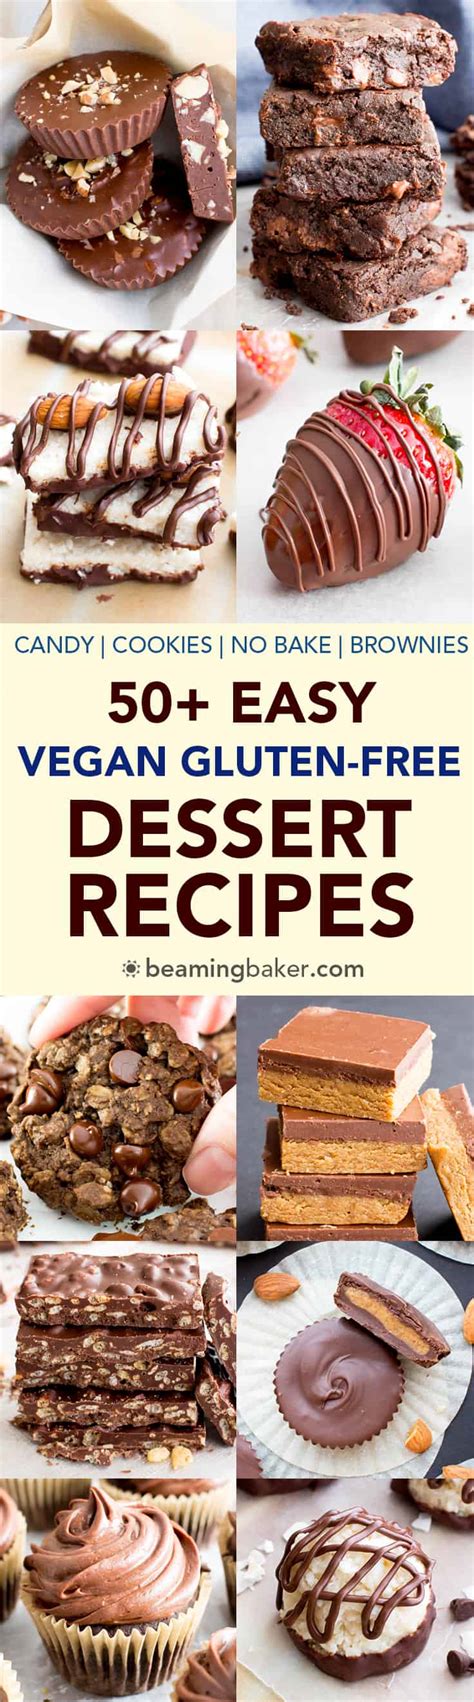 Sling all your ingredients into a blender and blitz for a refreshing, healthy treat in minutes. 50+ Gluten Free Dairy Free Desserts! - Beaming Baker